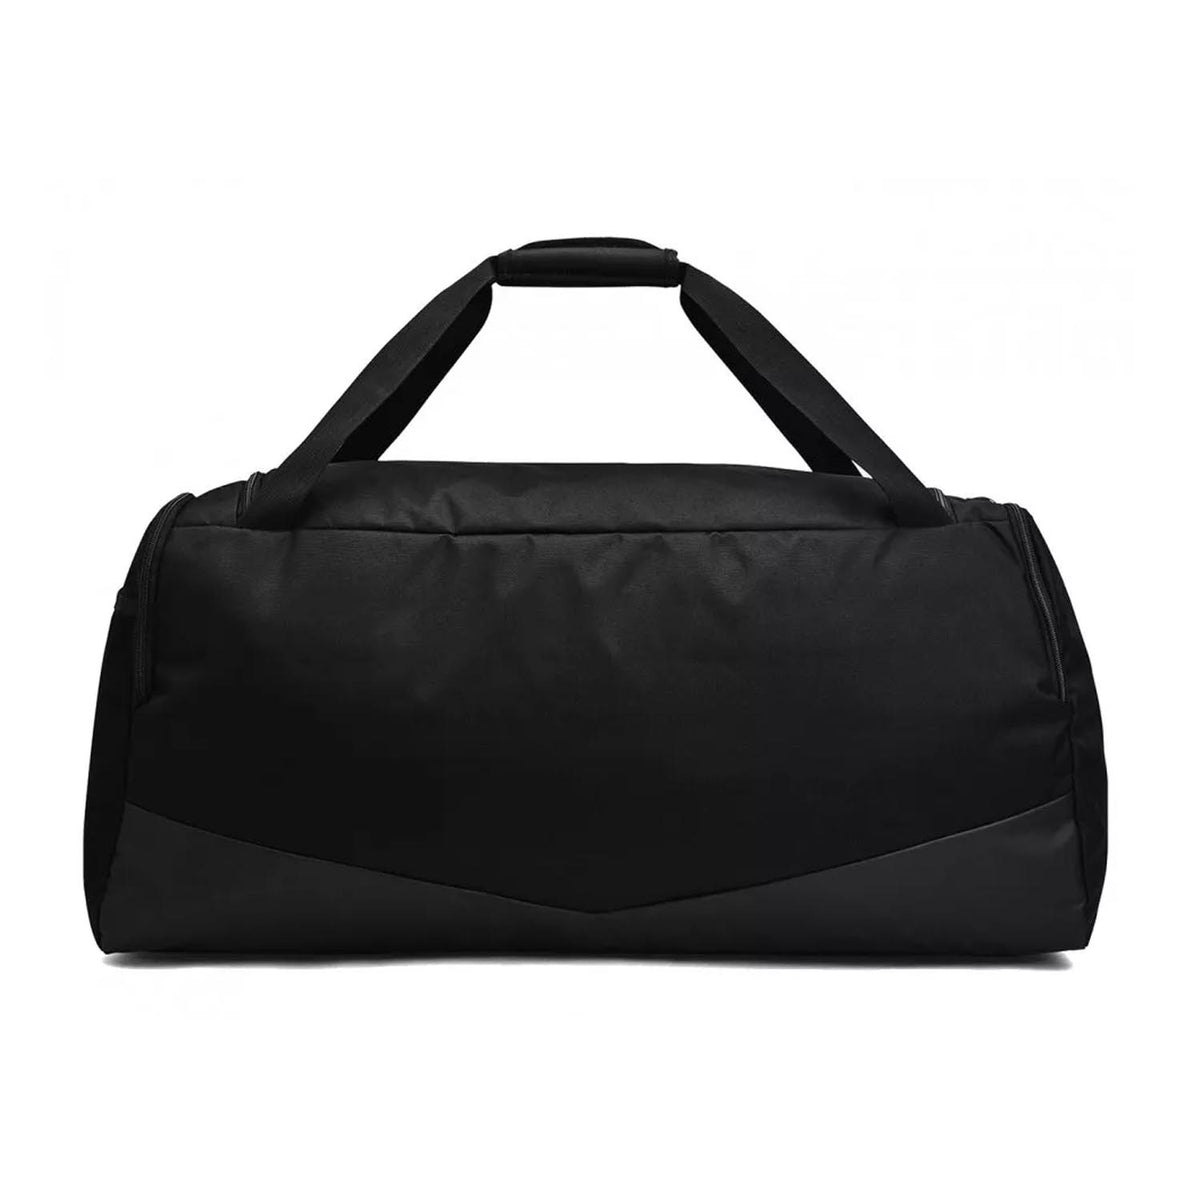 Under Armour Undeniable 5.0 Large Duffel Bag